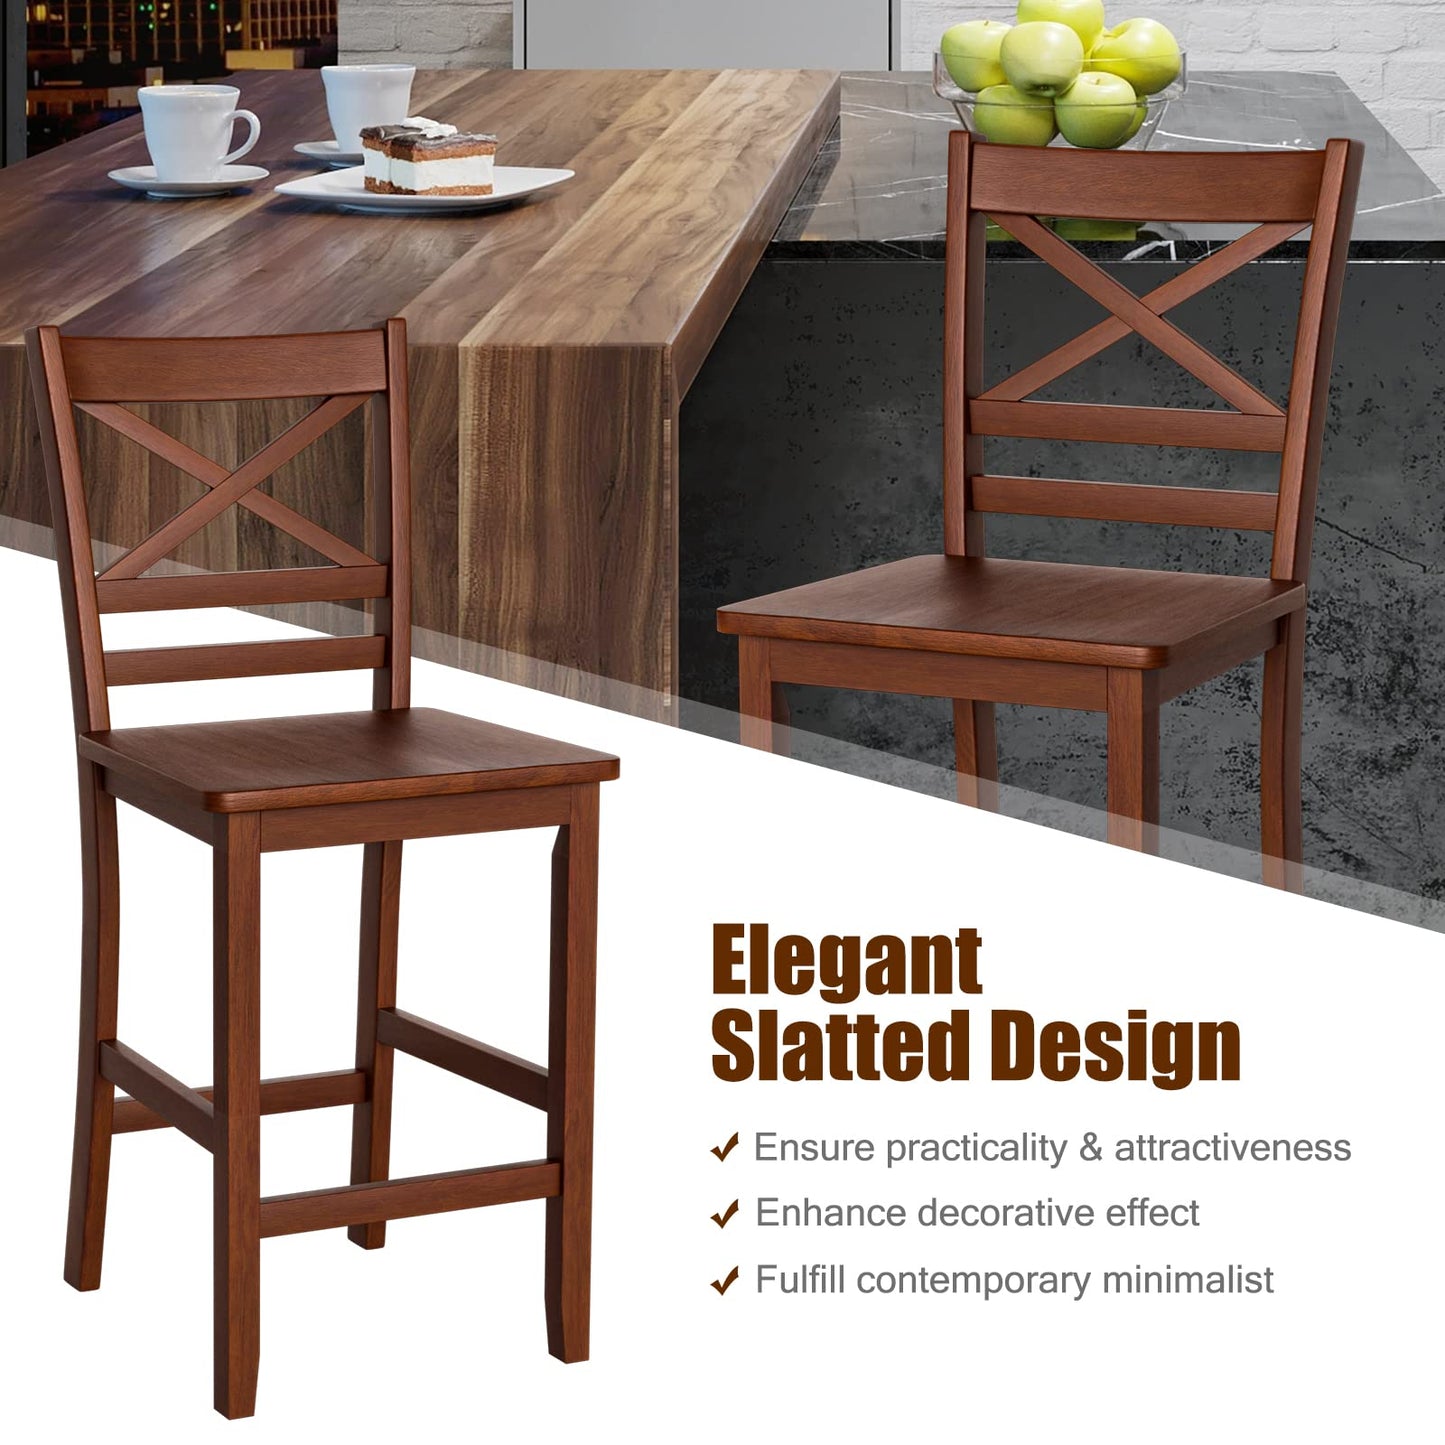 COSTWAY Bar Stools Set of 2, 25'' Antique Kitchen Counter Height Chairs with Wooden X-Shaped Backrest & Rubber Wood Legs, Suitable for Home, Cafe